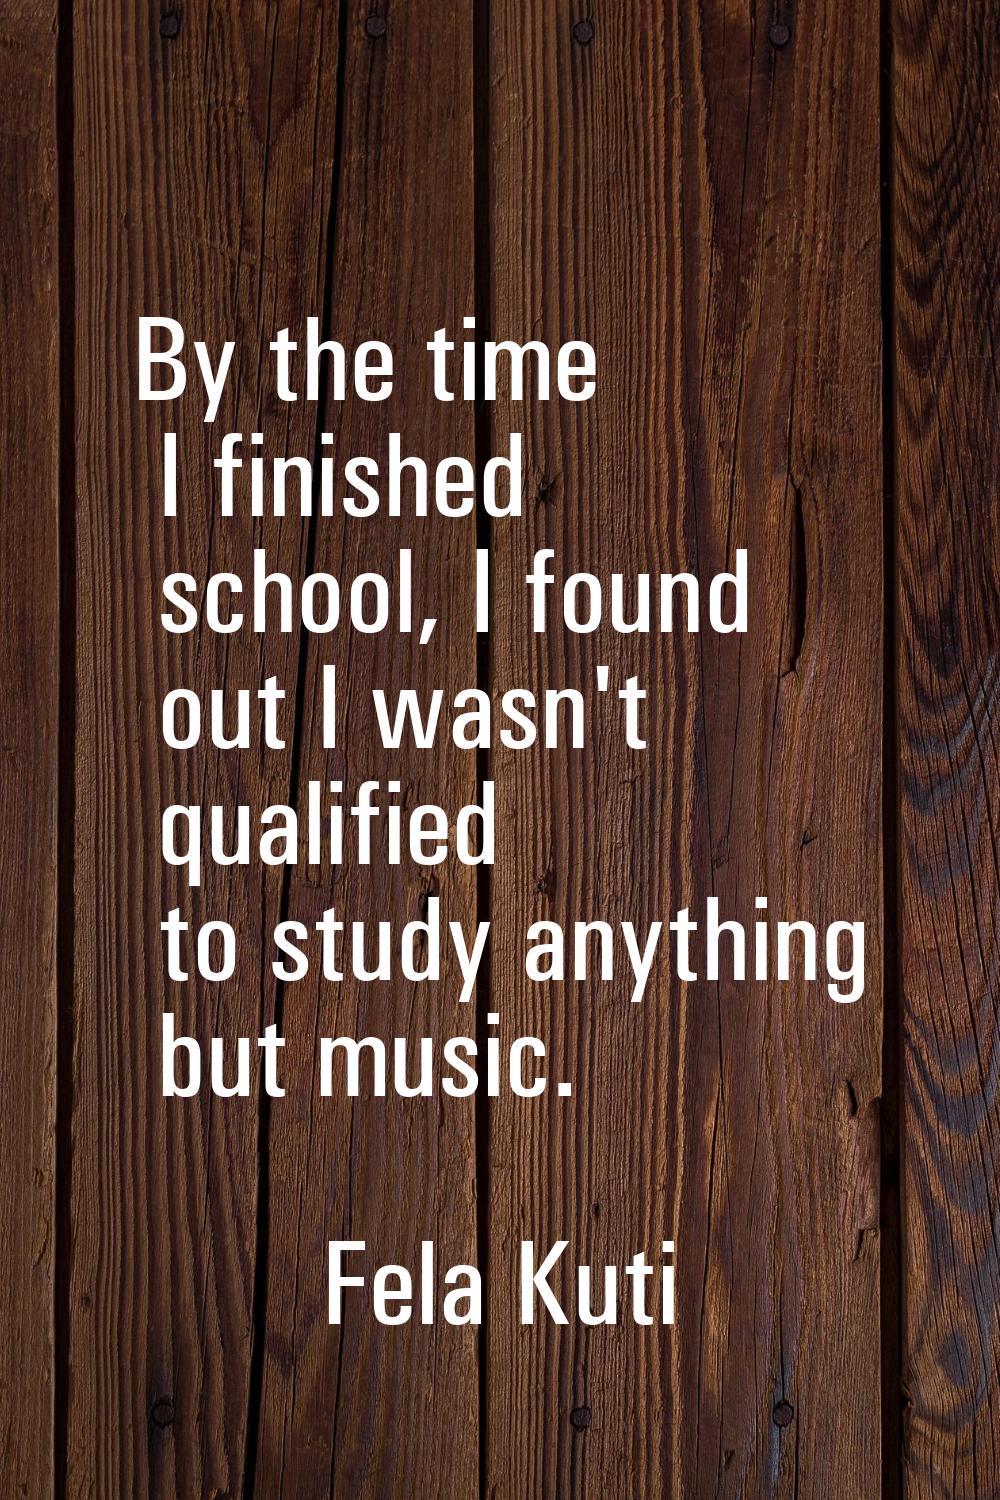 By the time I finished school, I found out I wasn't qualified to study anything but music.